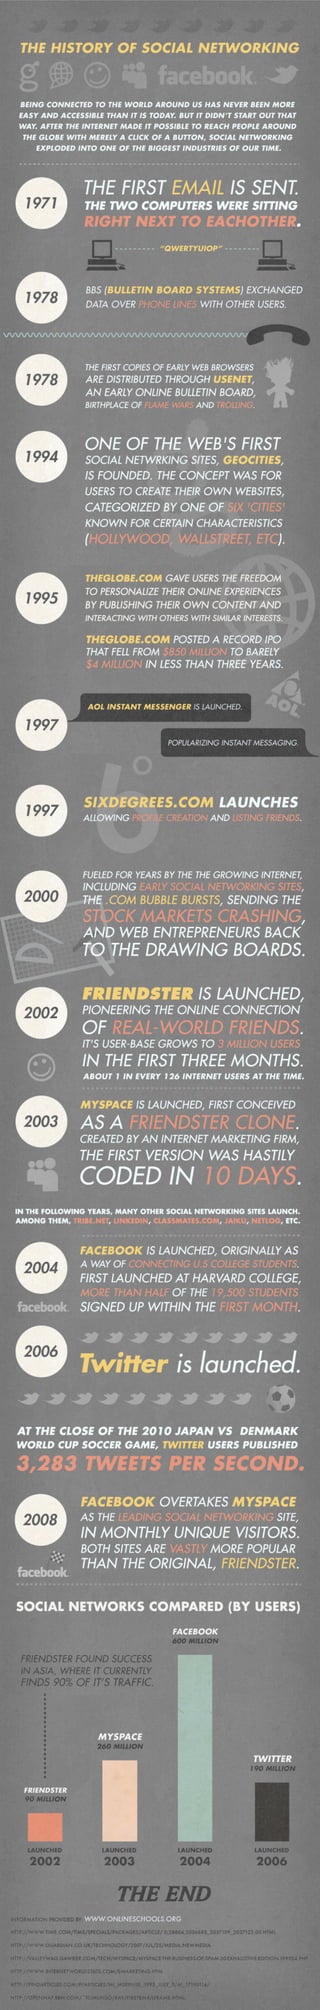 2012 History of Social Networking Infographic